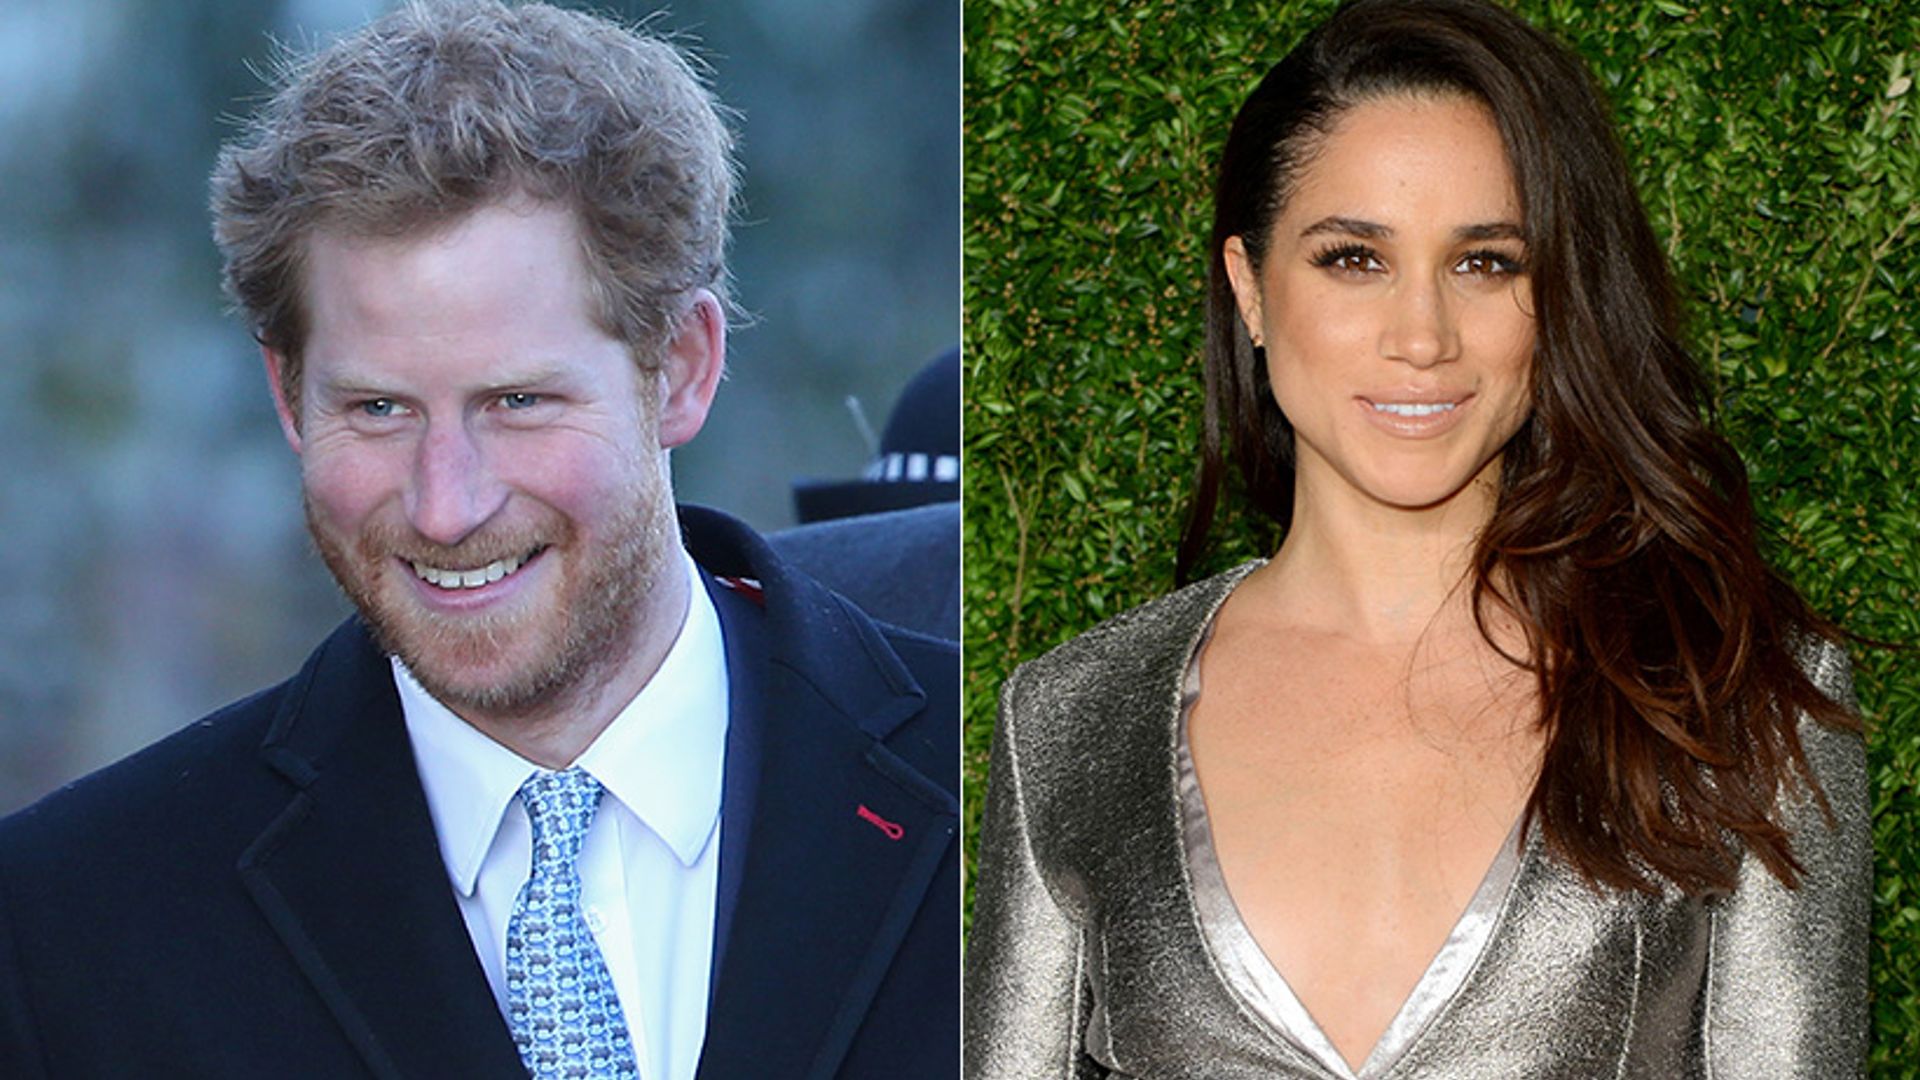 Prince Harry and Meghan Markle's secret date night at the museum revealed